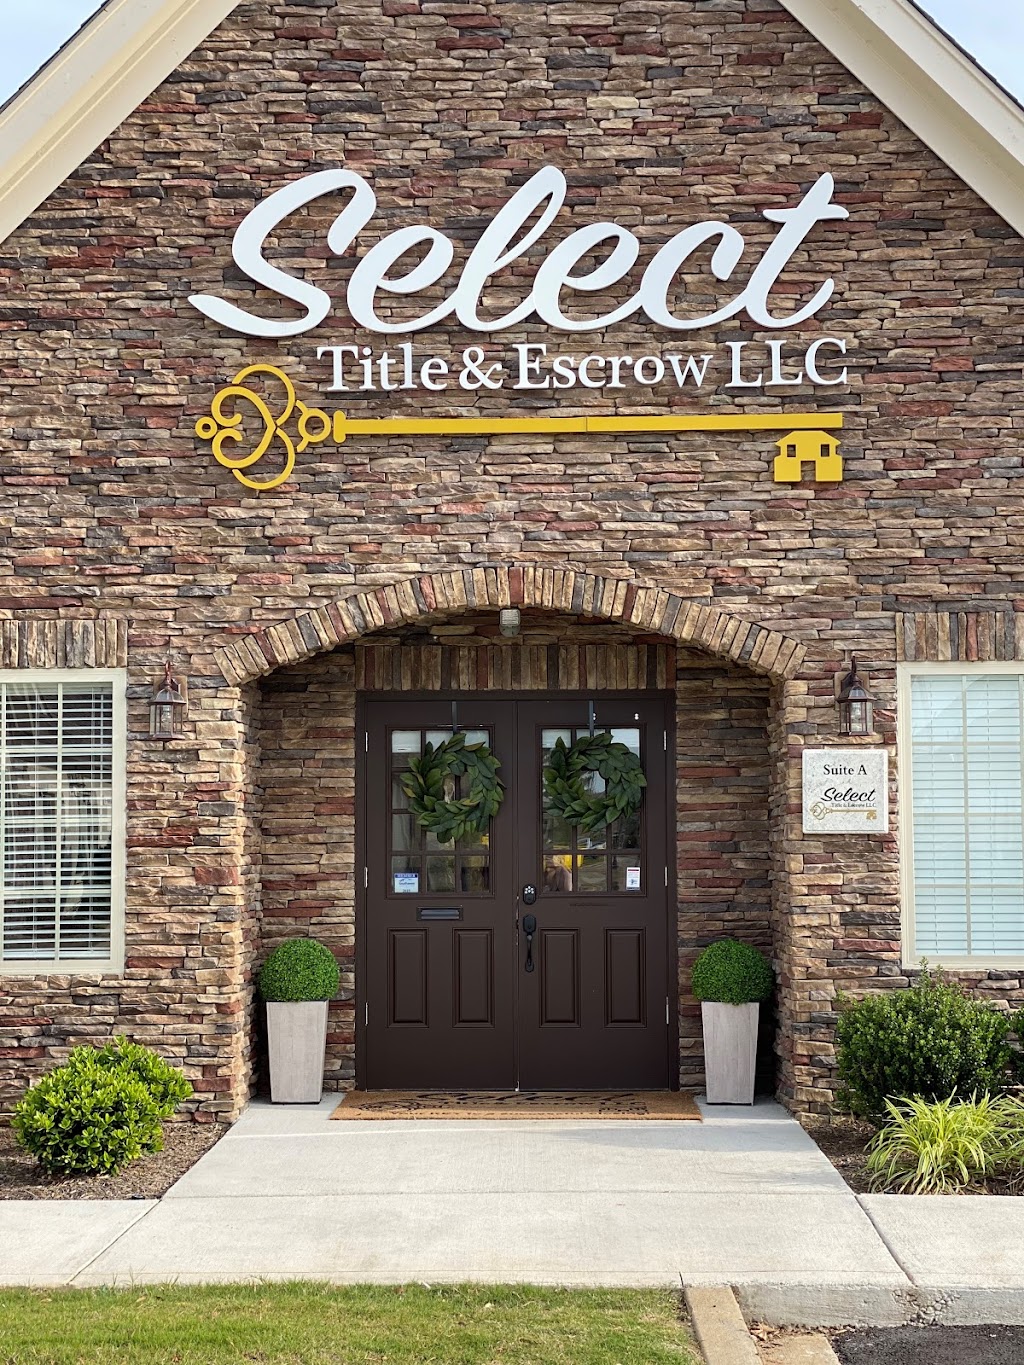 Select Title & Escrow LLC | 5740 Getwell Rd Bldg. 8, Ste. A, Southaven, MS 38672, USA | Phone: (662) 349-3930